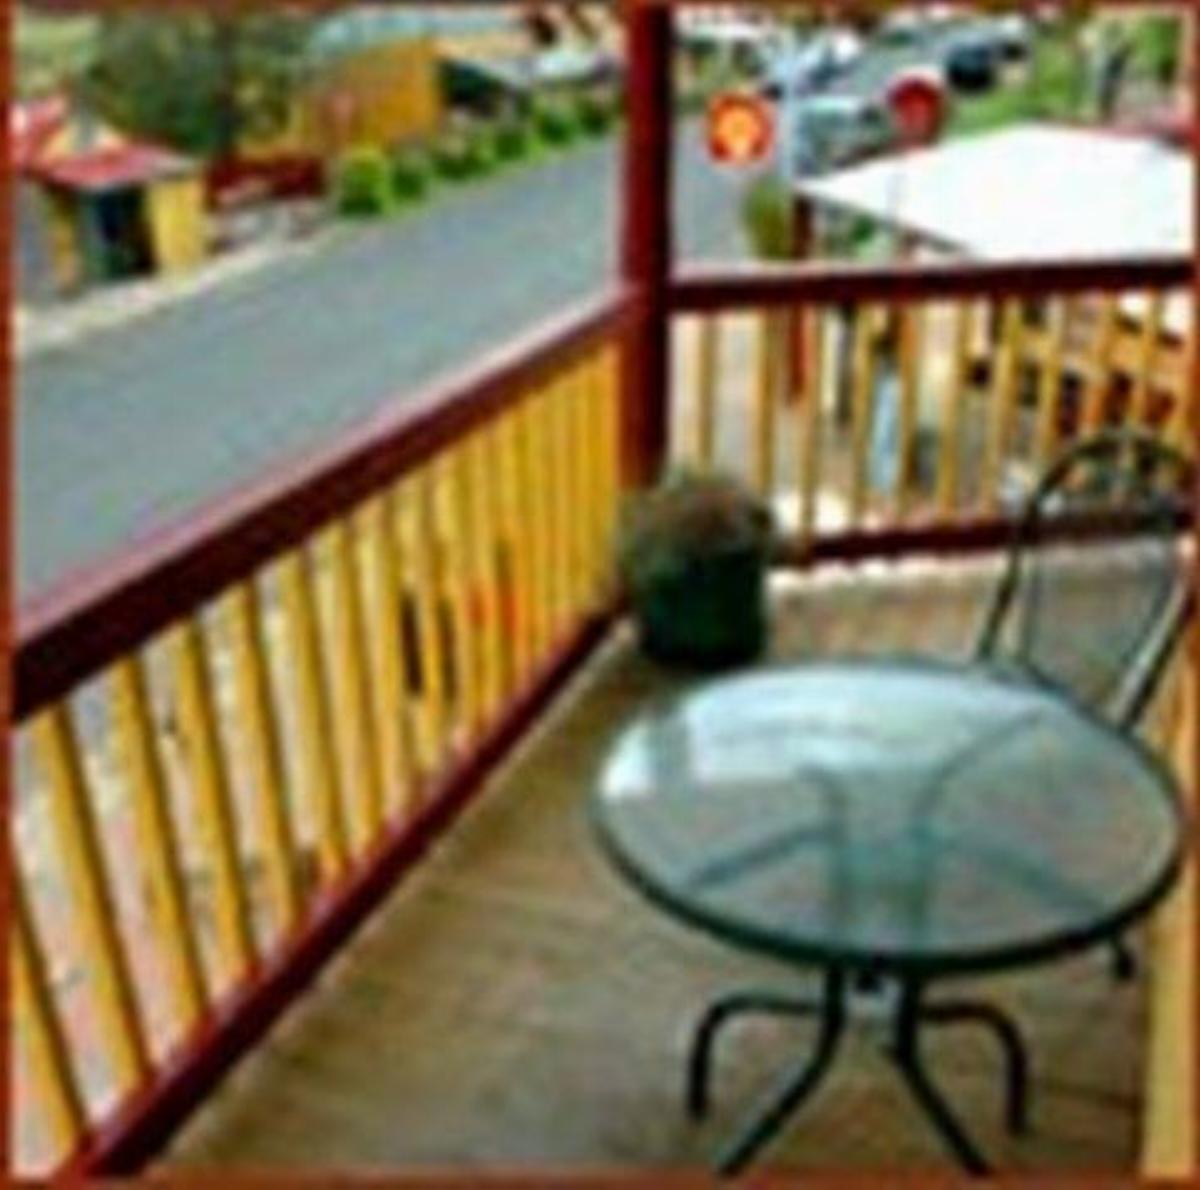 Two Story Bed and Breakfast Hotel Central Tilba Australia